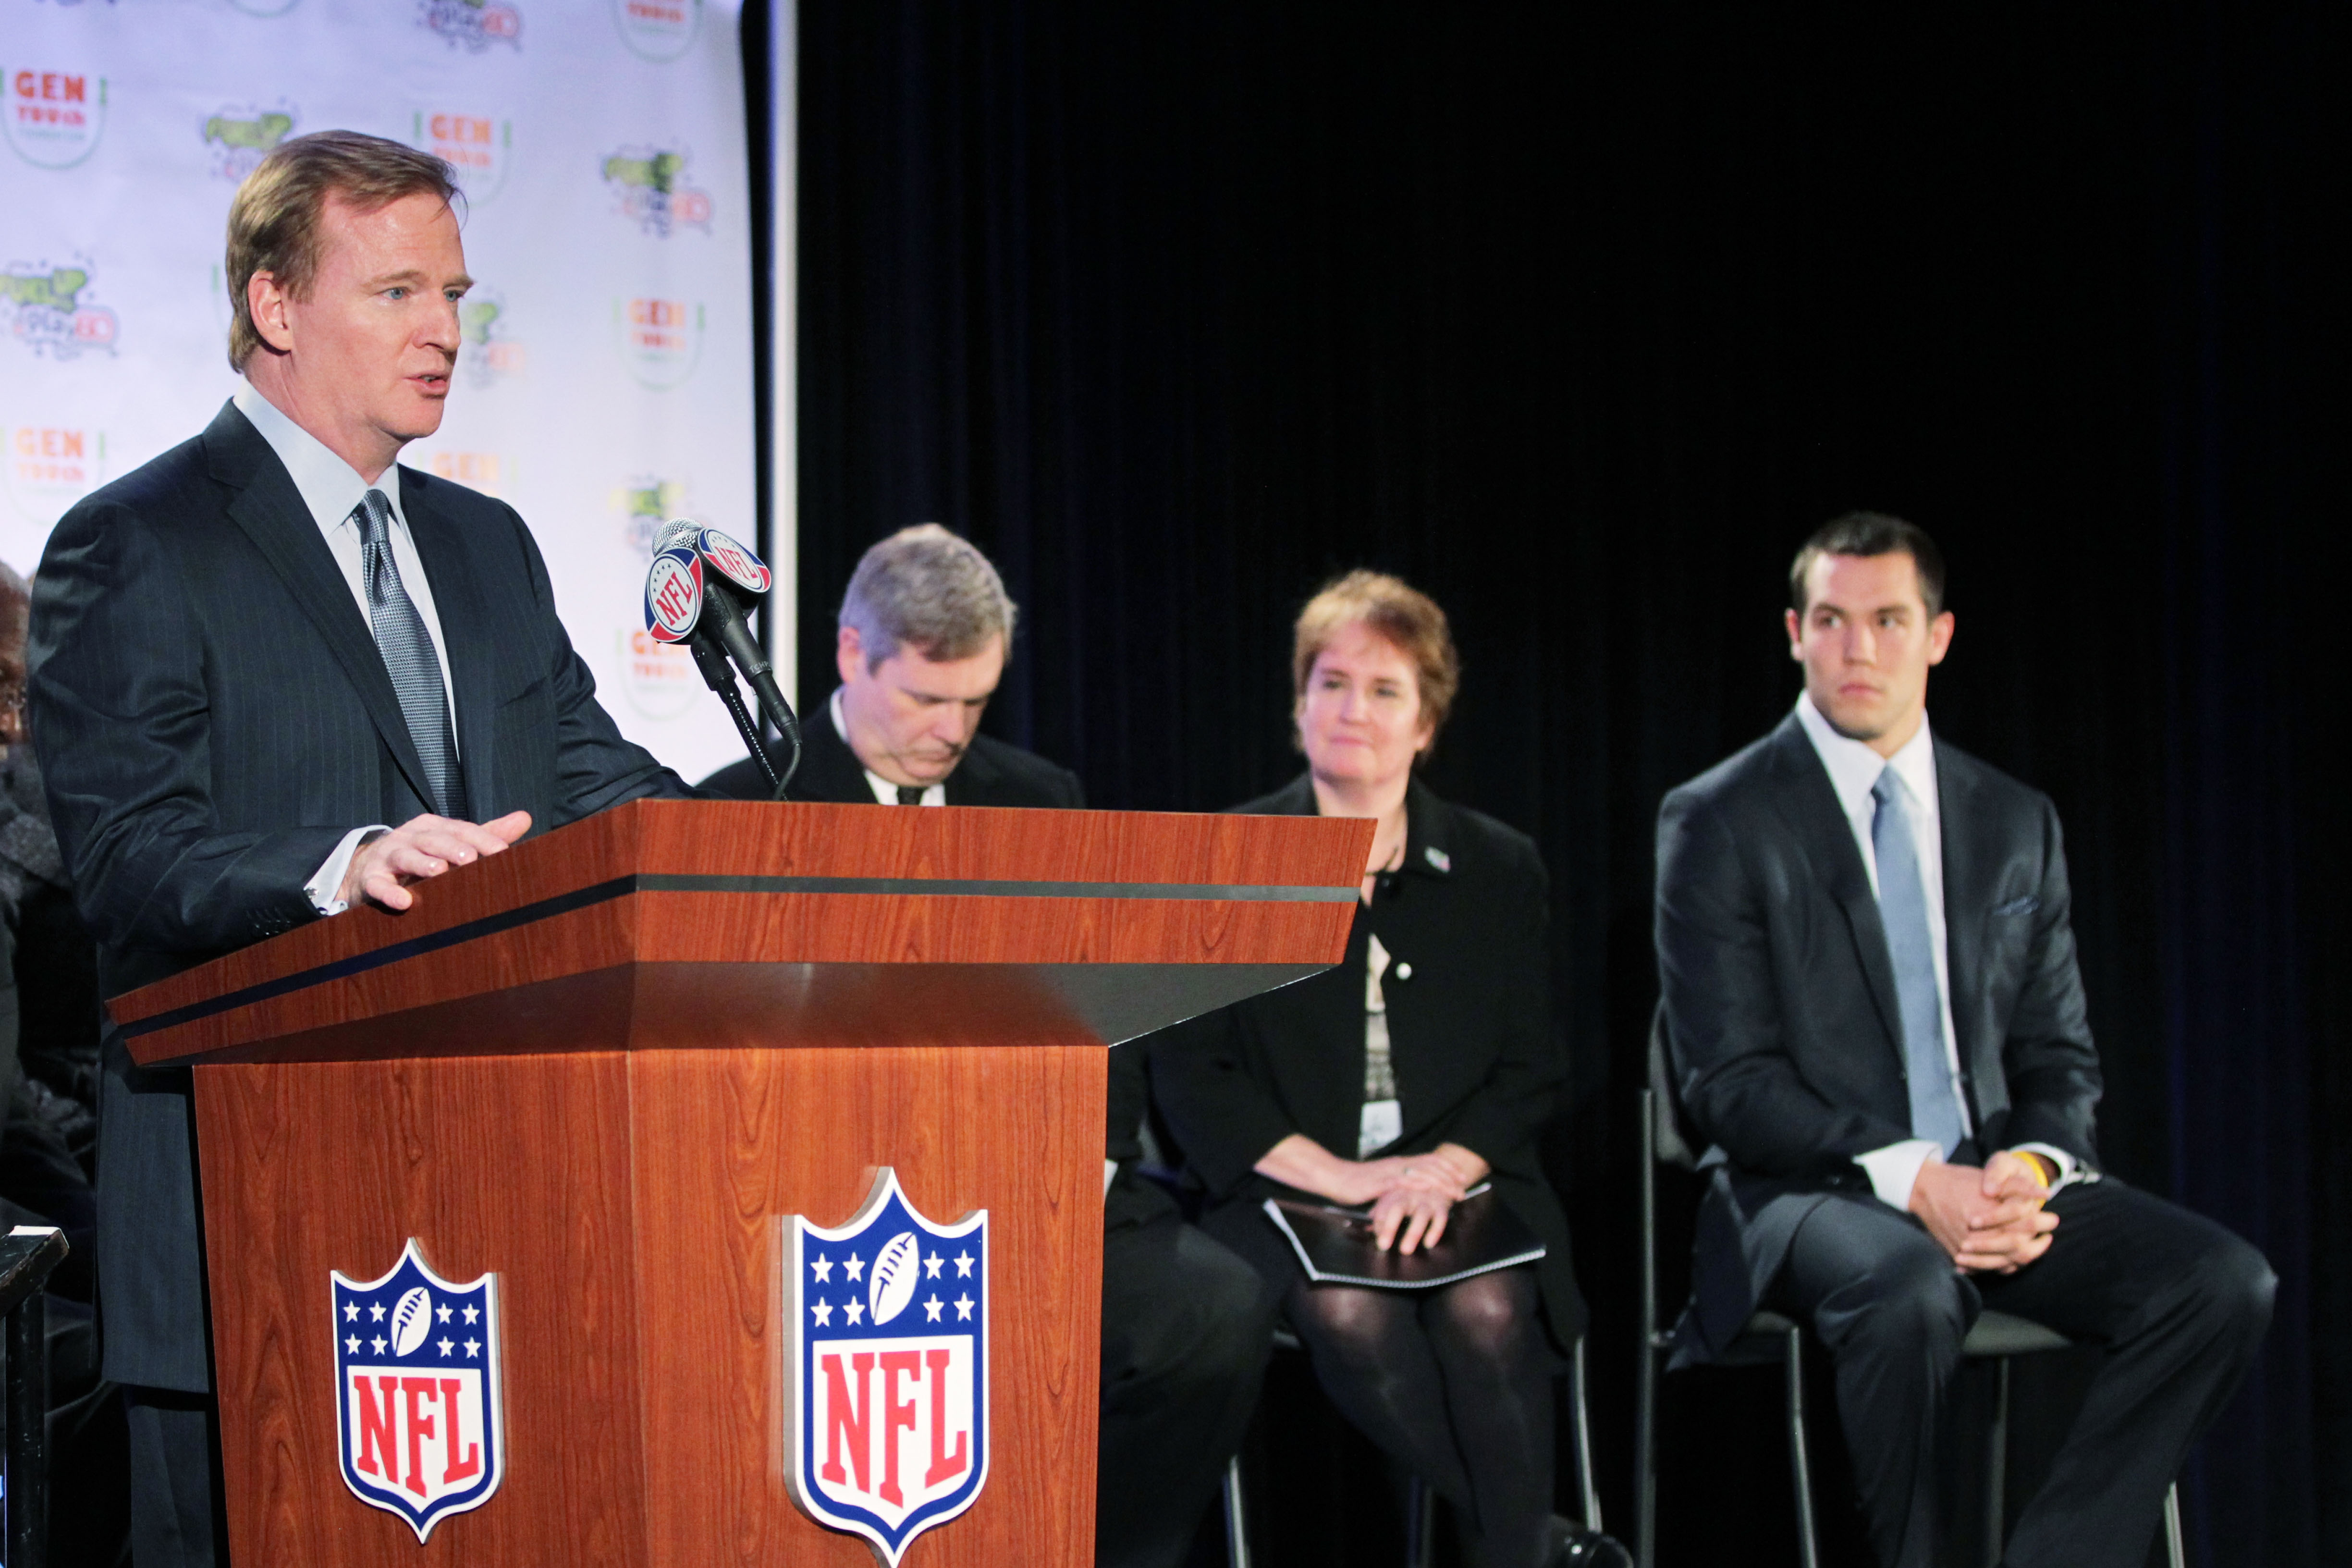 DALLAS, TX - FEBRUARY 04:  (L-R) NFL Commissioner Roger Goodell speaks as U.S. Secretary of Agriculture Tom Vilsack, President of the National Dairy Council Jean Ragalie and Sam Bradford of the St. Louis Rams look on during the launch of the Gen YOUth Fou